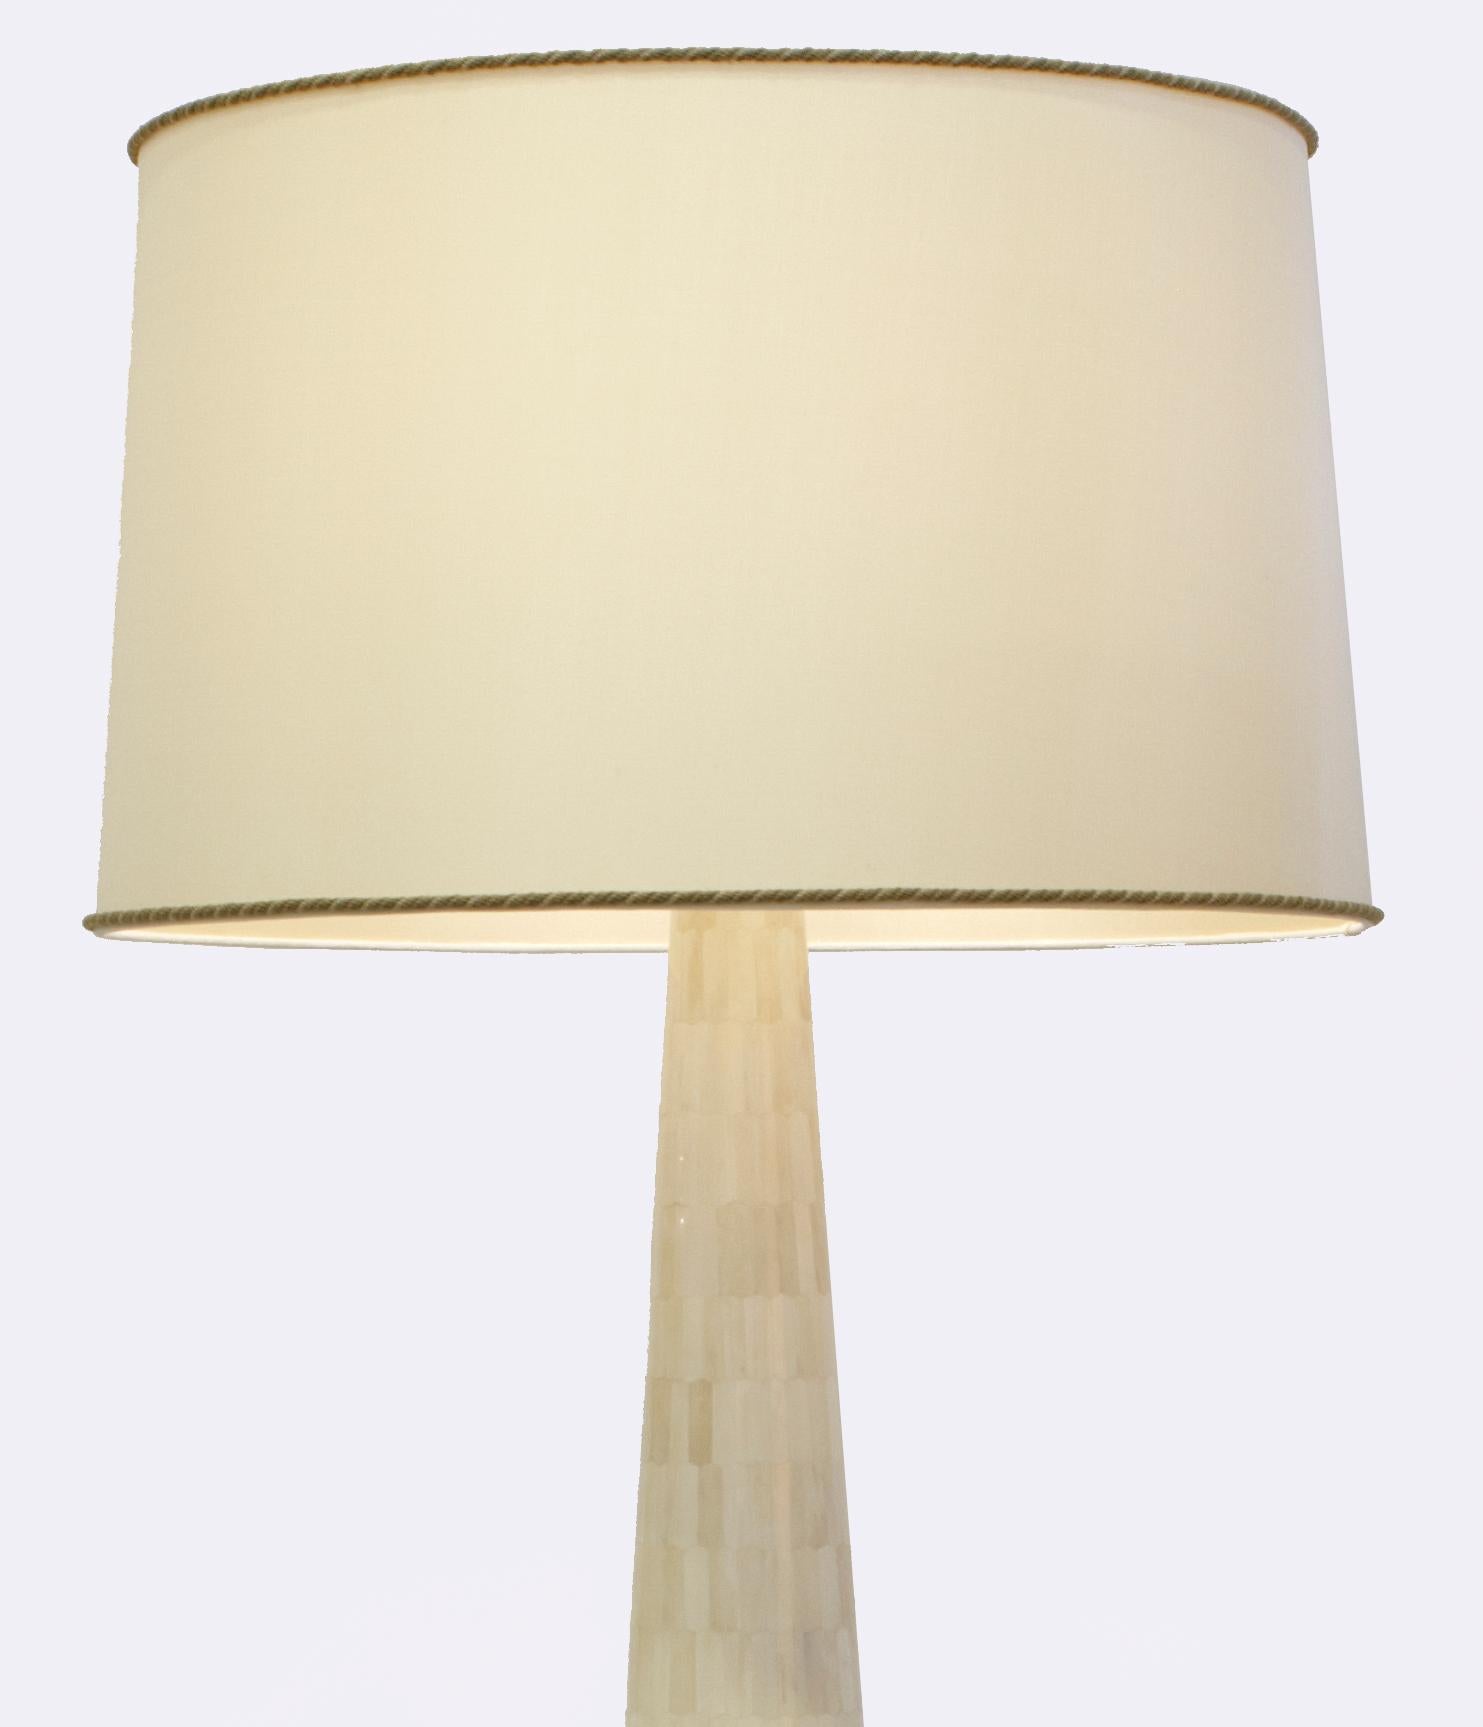 The Nima round floor lamp makes a stunning statement with its soaring solid wood conical base and intricate bone marquetry pattern. The light illuminates hundreds of creamy camel bone chips, creating a soft, warm glow.
Lamp shade not included.
Size: